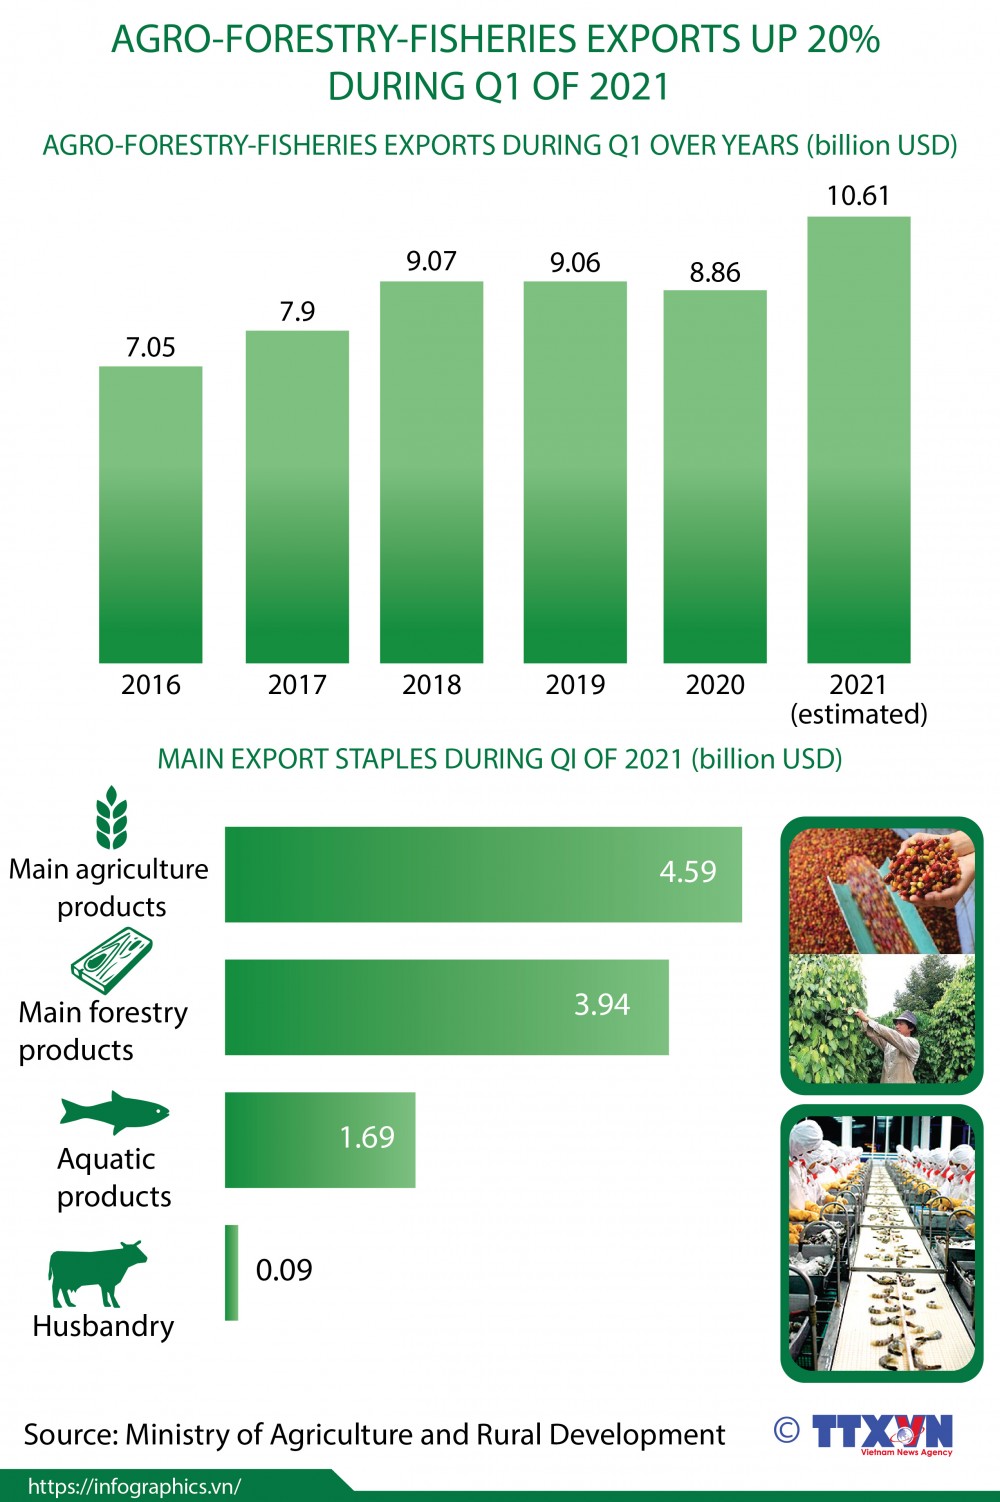 Agro-forestry-fishery exports up 20% during Q1